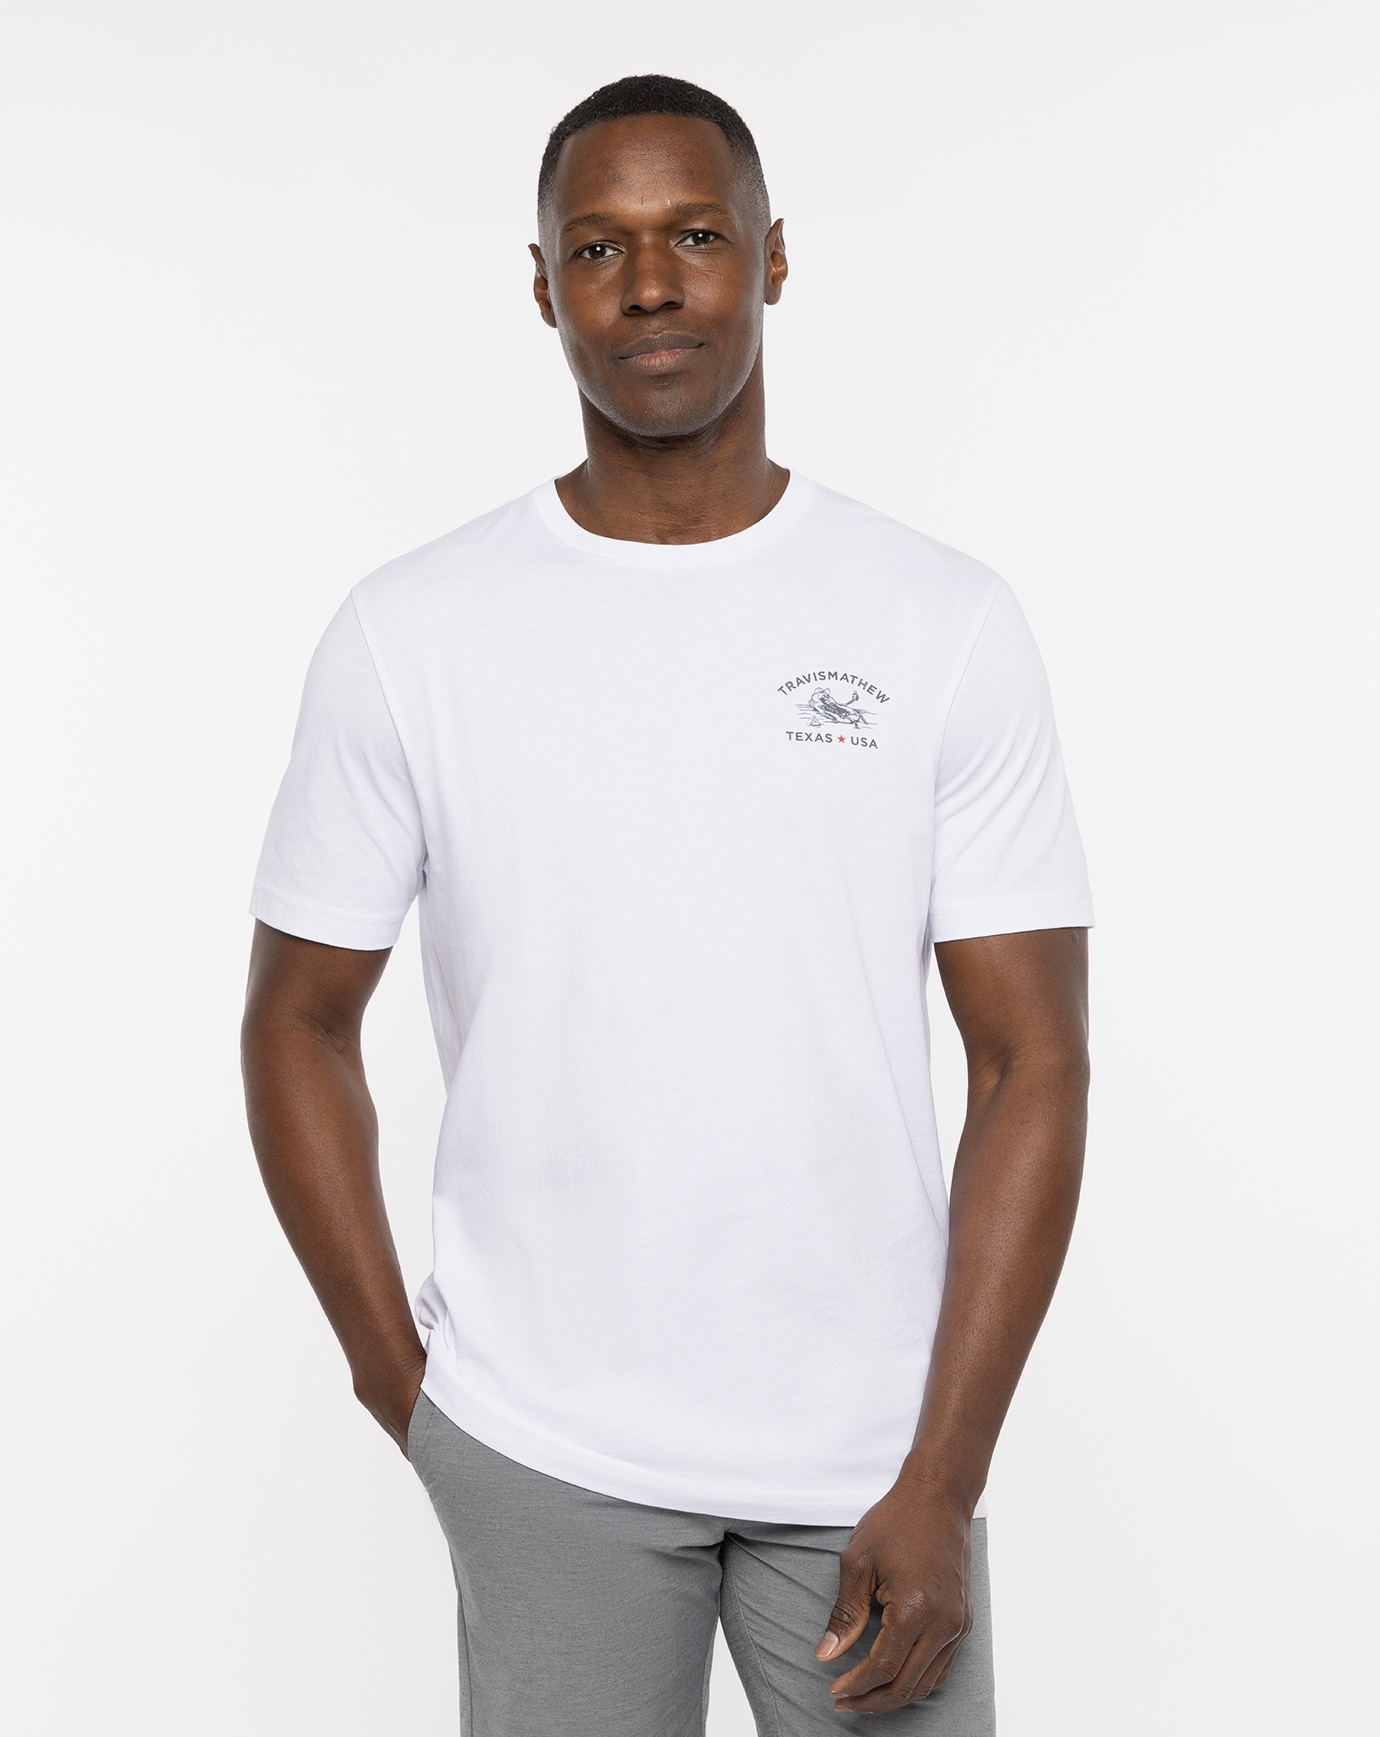 Related Product - BRACKEN CAVE TEE